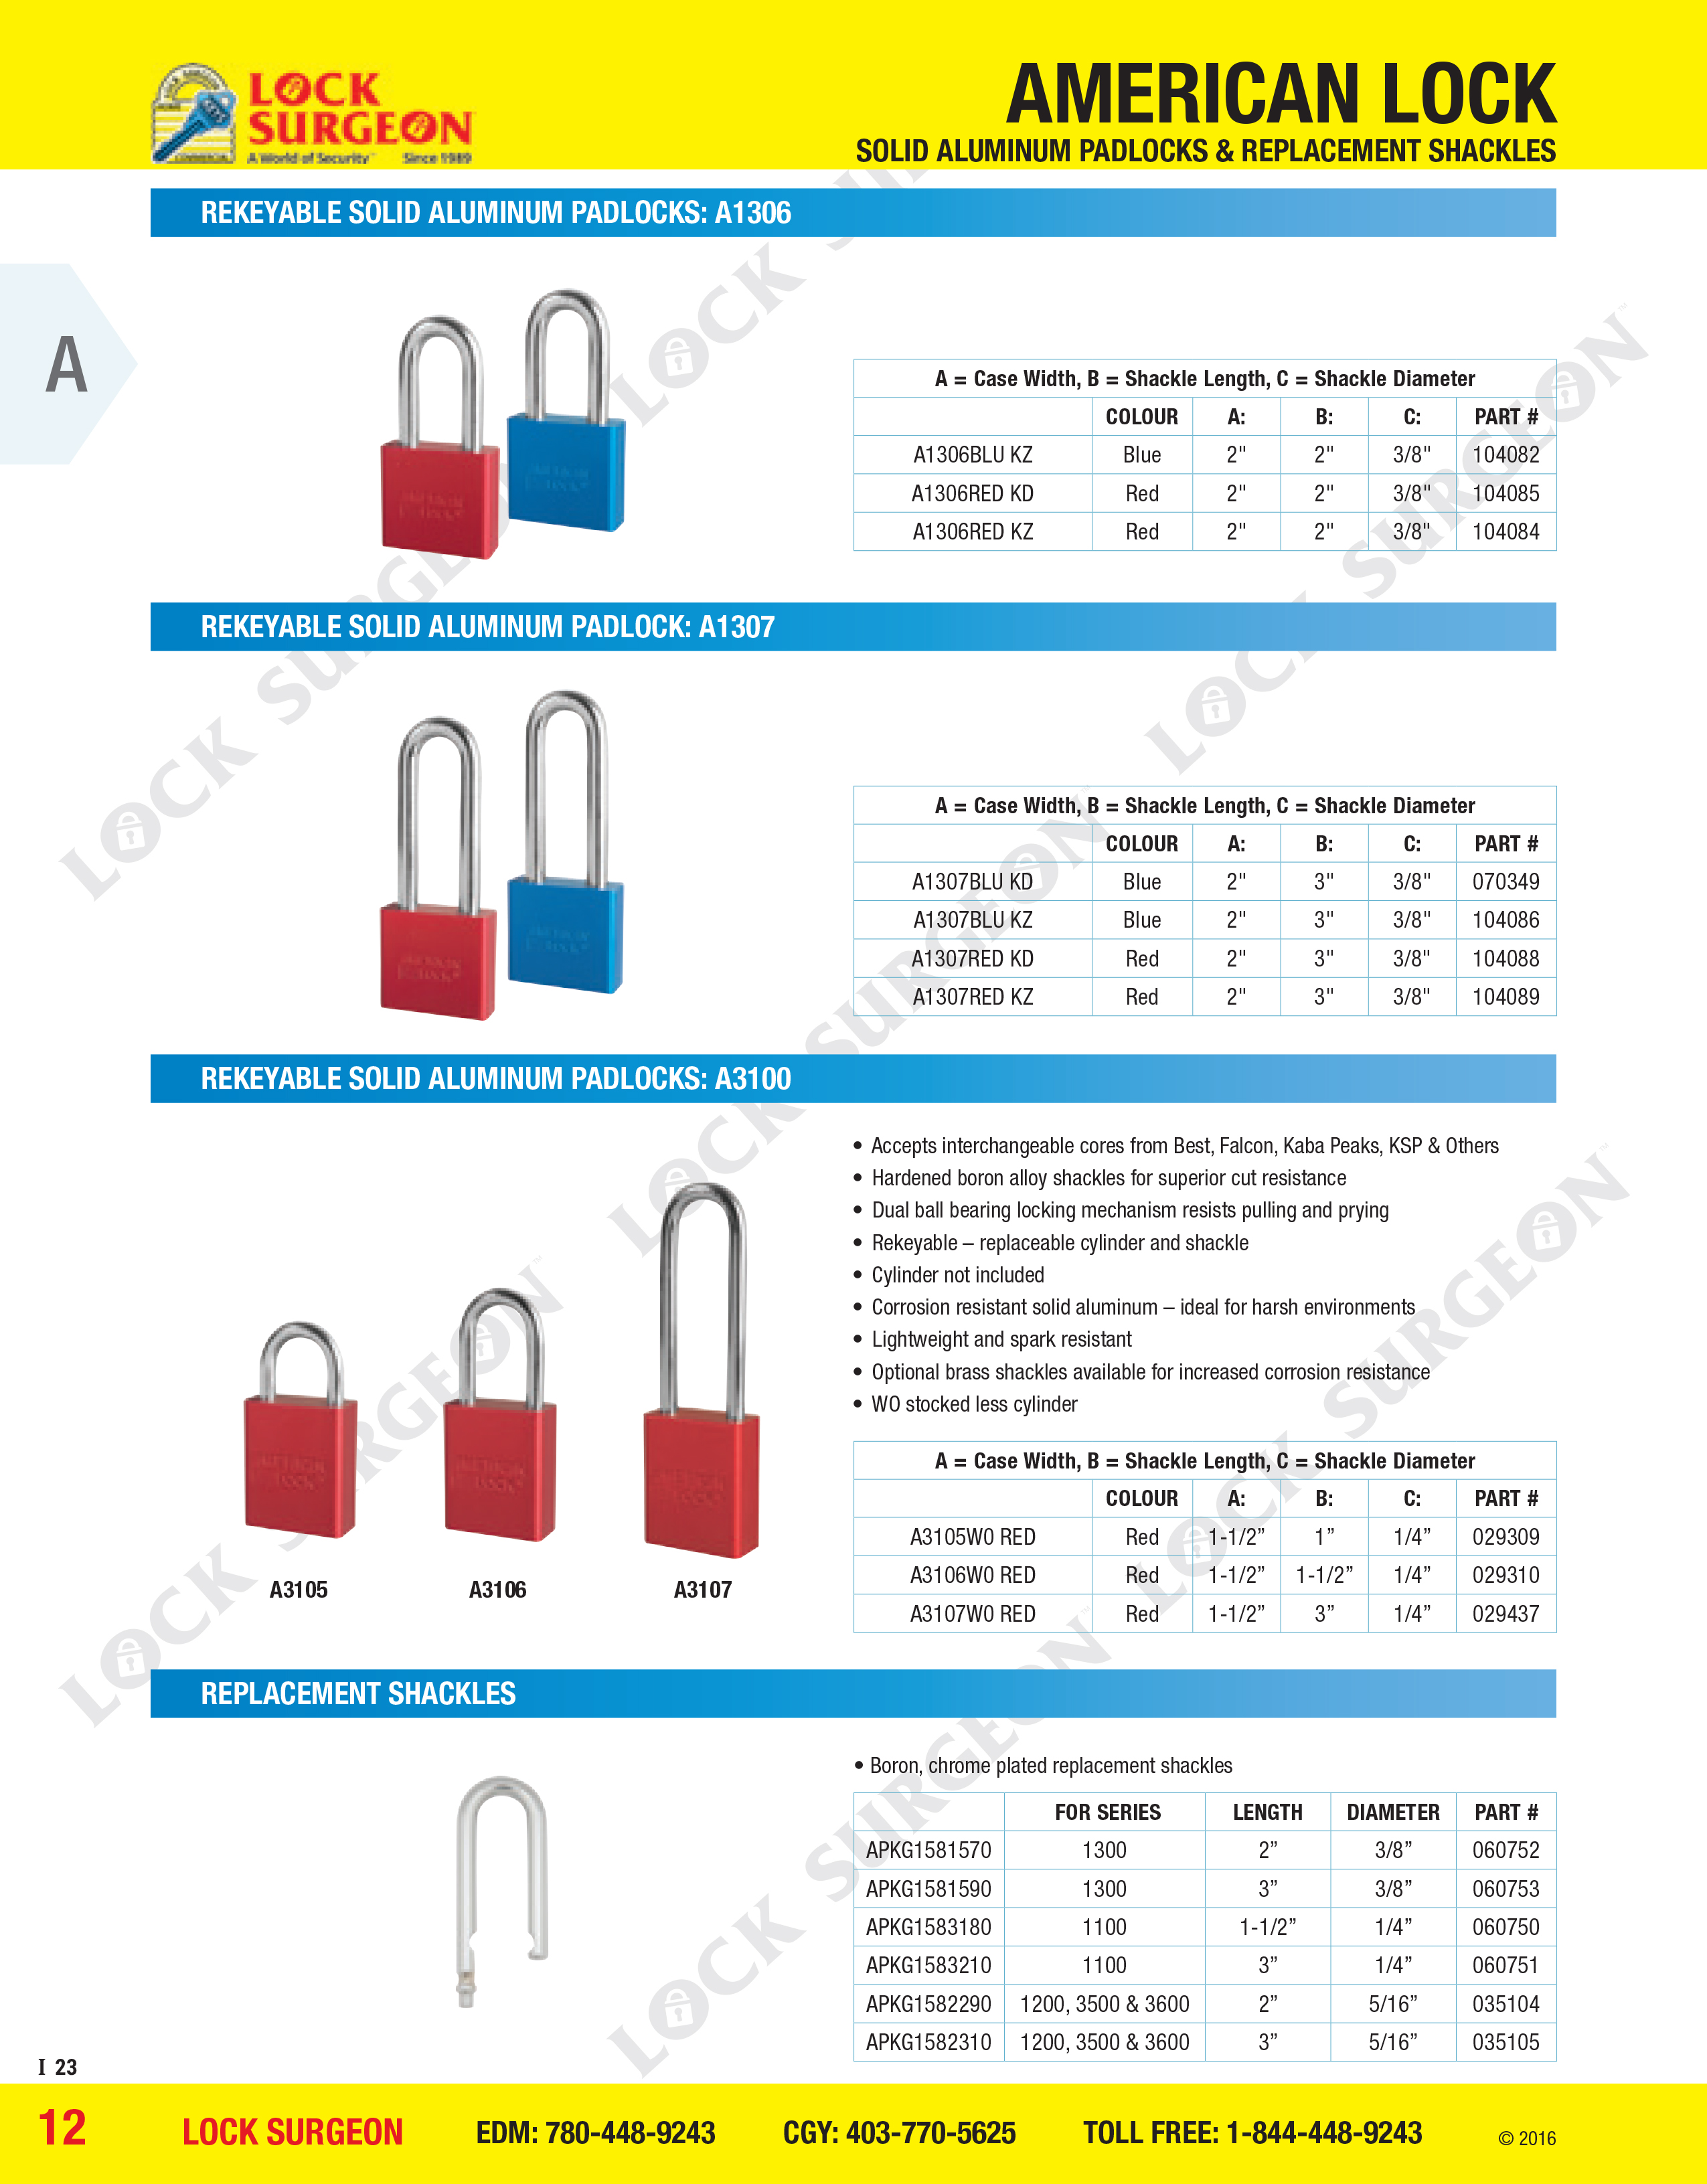 Rekeyable solid aluminium padlocks A1306, A1307, A3100 series and replacement shackles Lock Surgeon.